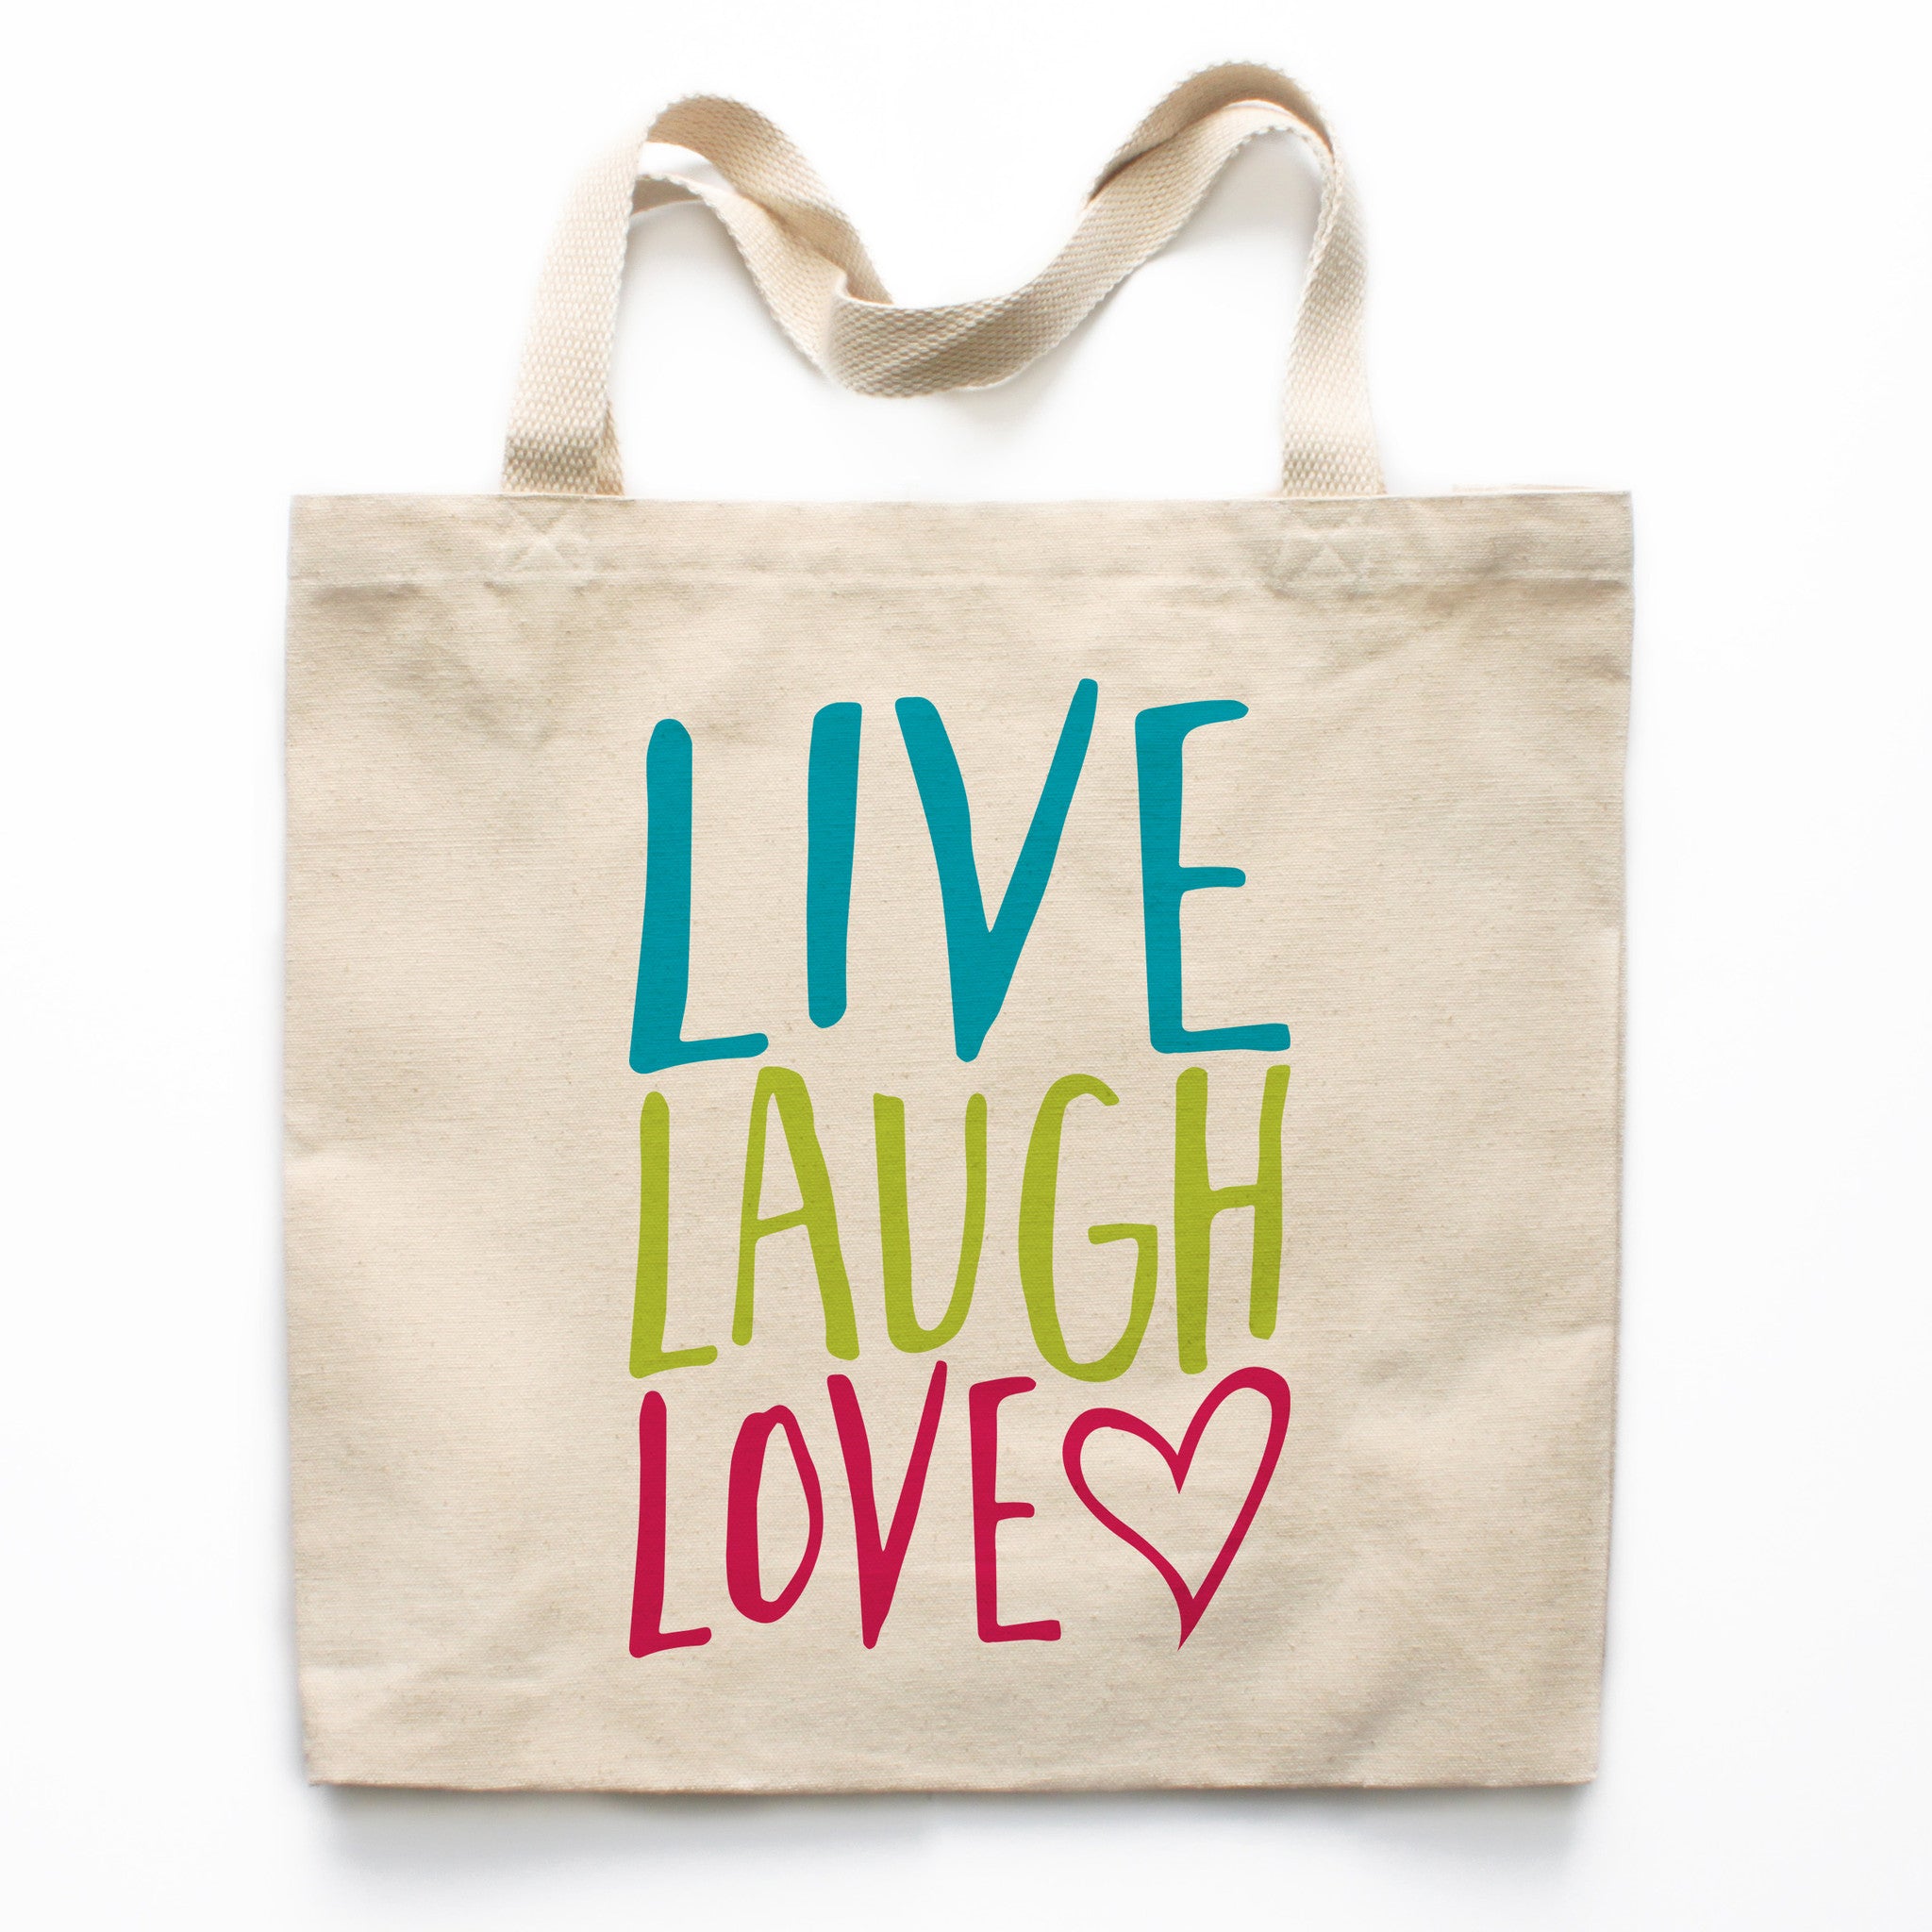 Under the Influence of Love Canvas Tote Bag